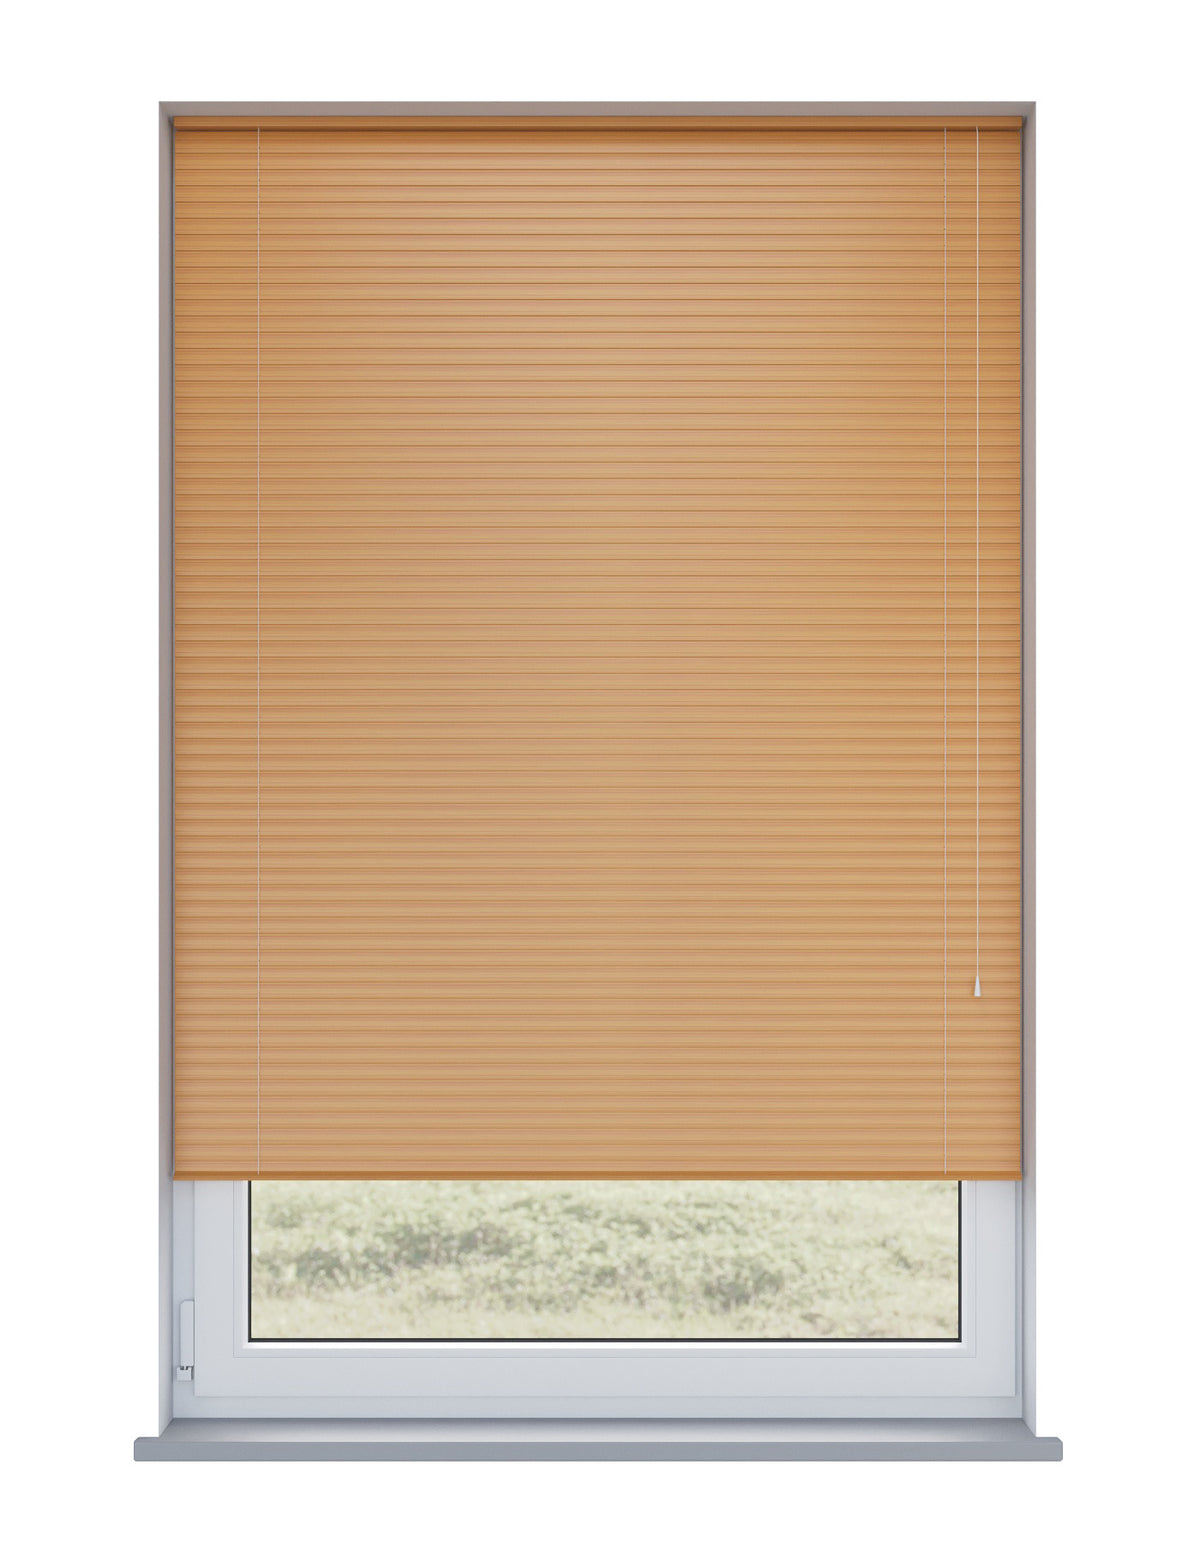 Expressions Autumn Gold Wooden Blind